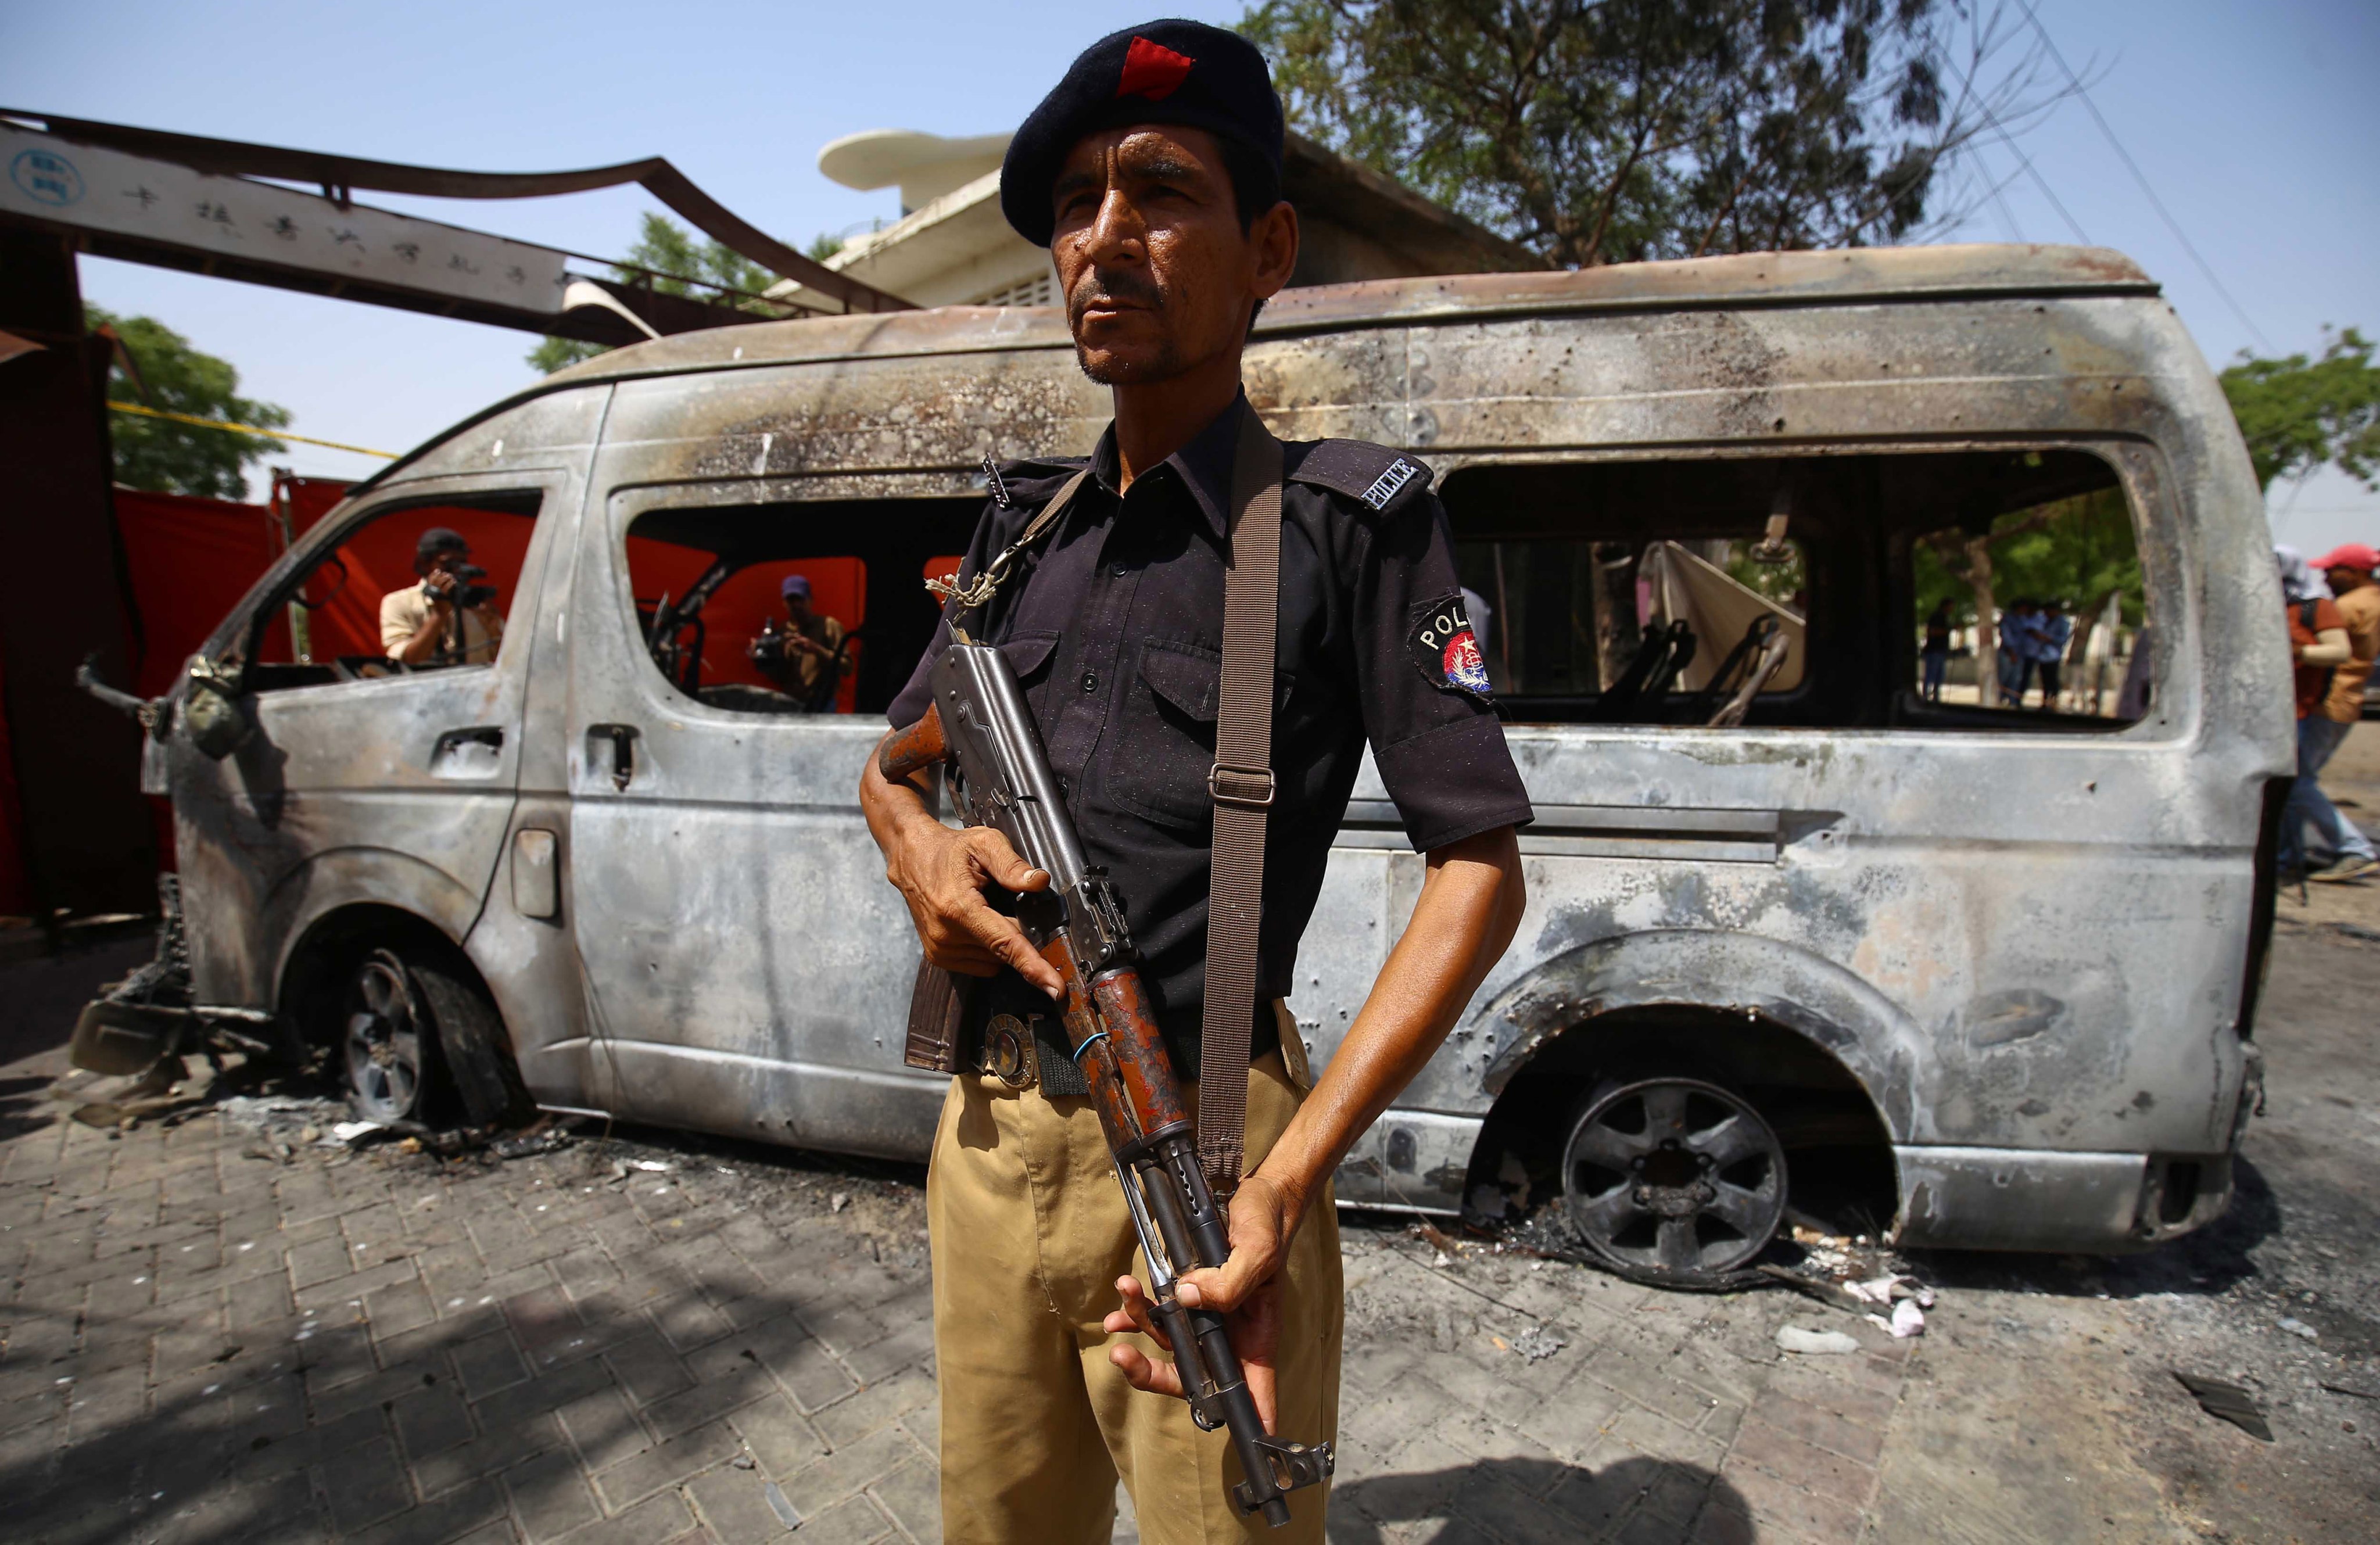 A suicide bomber attacked a bus carrying a group of Chinese nationals in Karachi last year, killing four people. Photo: EPA-EFE